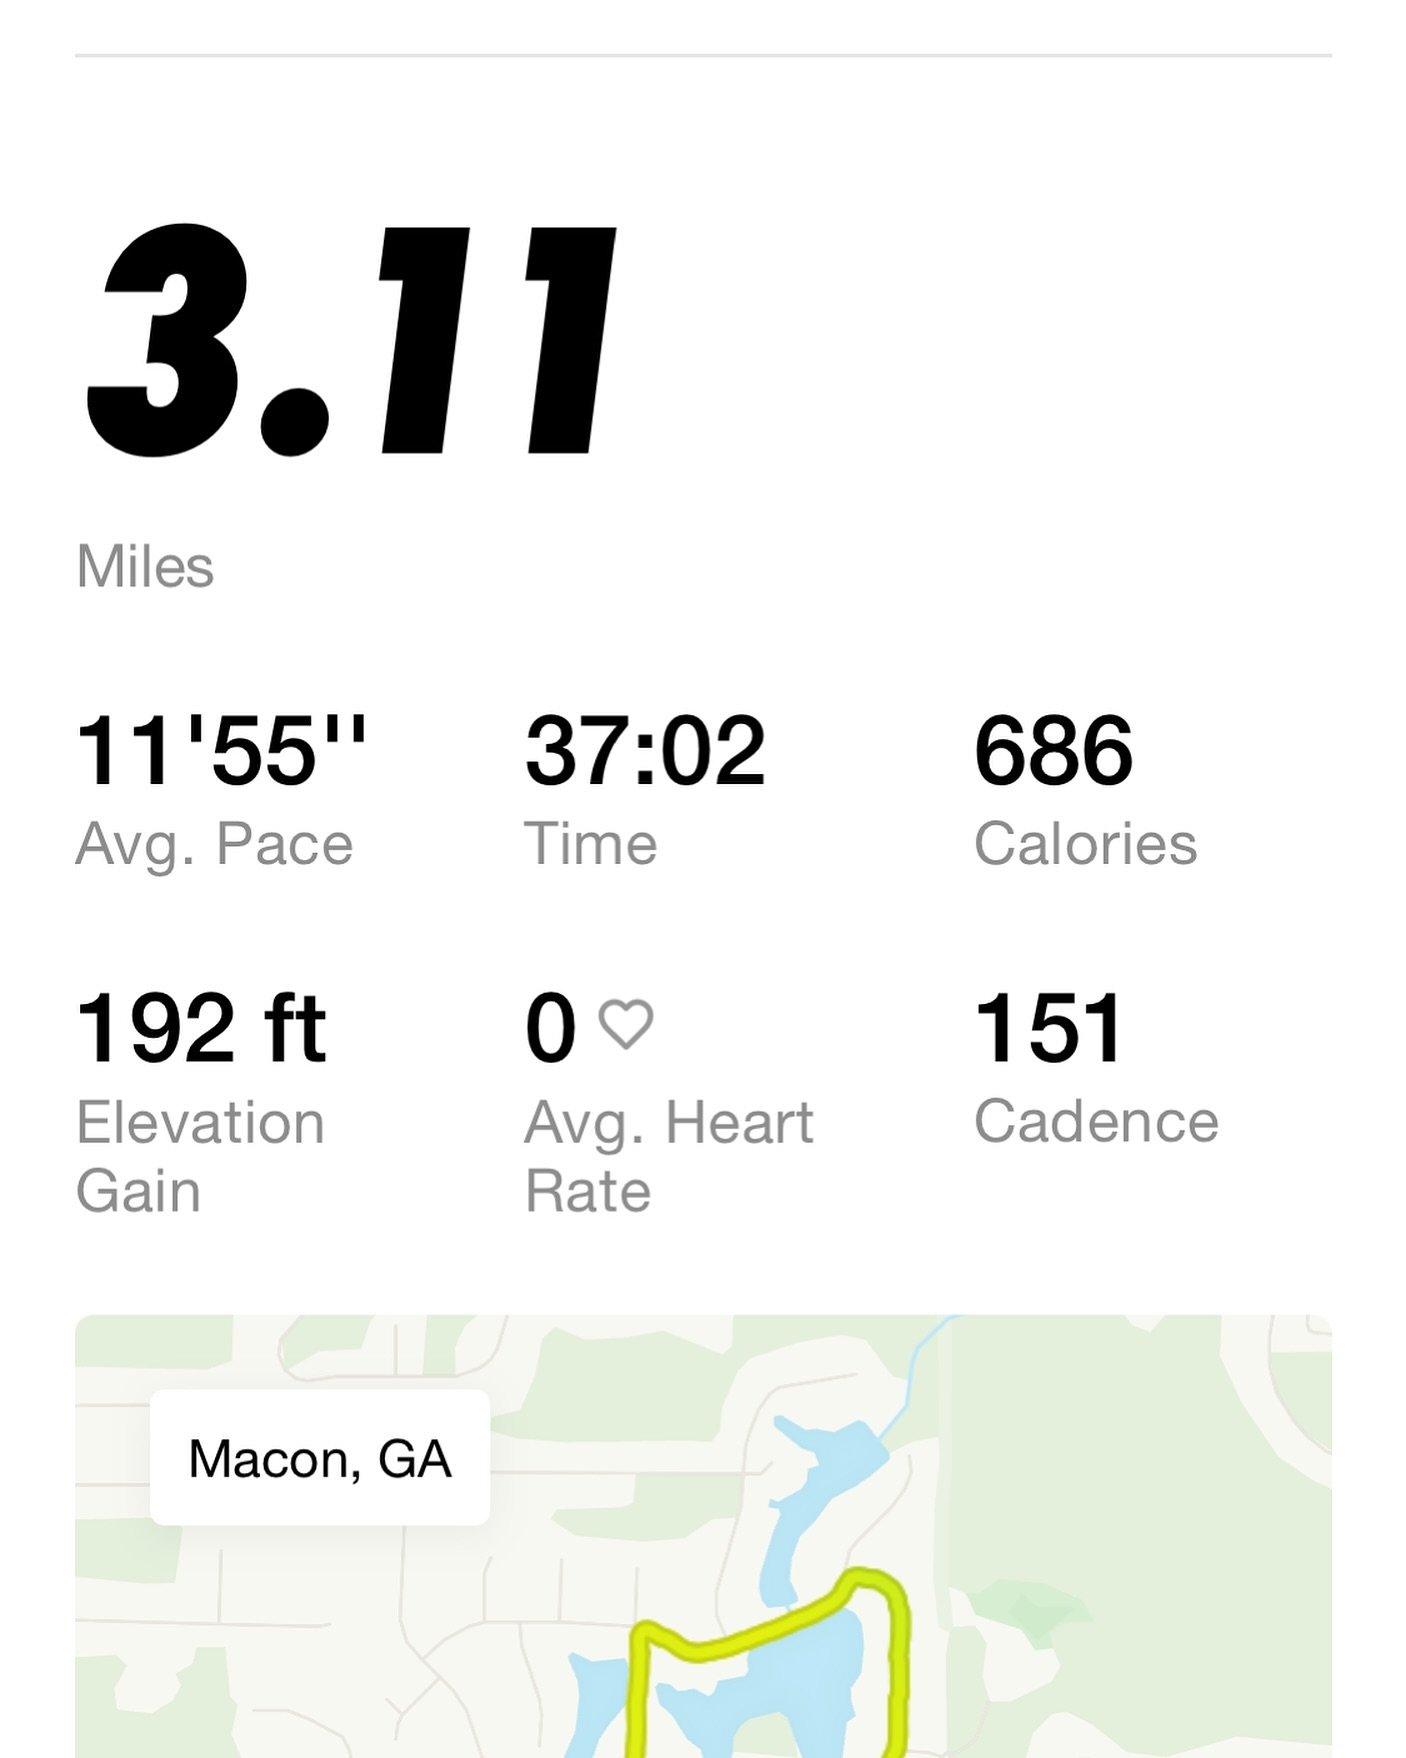 I&rsquo;ve been working hard the last few months on improving my 5k time. Well today the work paid off. I cut a solid 3 minutes off my time. I&rsquo;m now as fast as I was over 5 years ago. I thought I&rsquo;d never see those times again but I&rsquo;